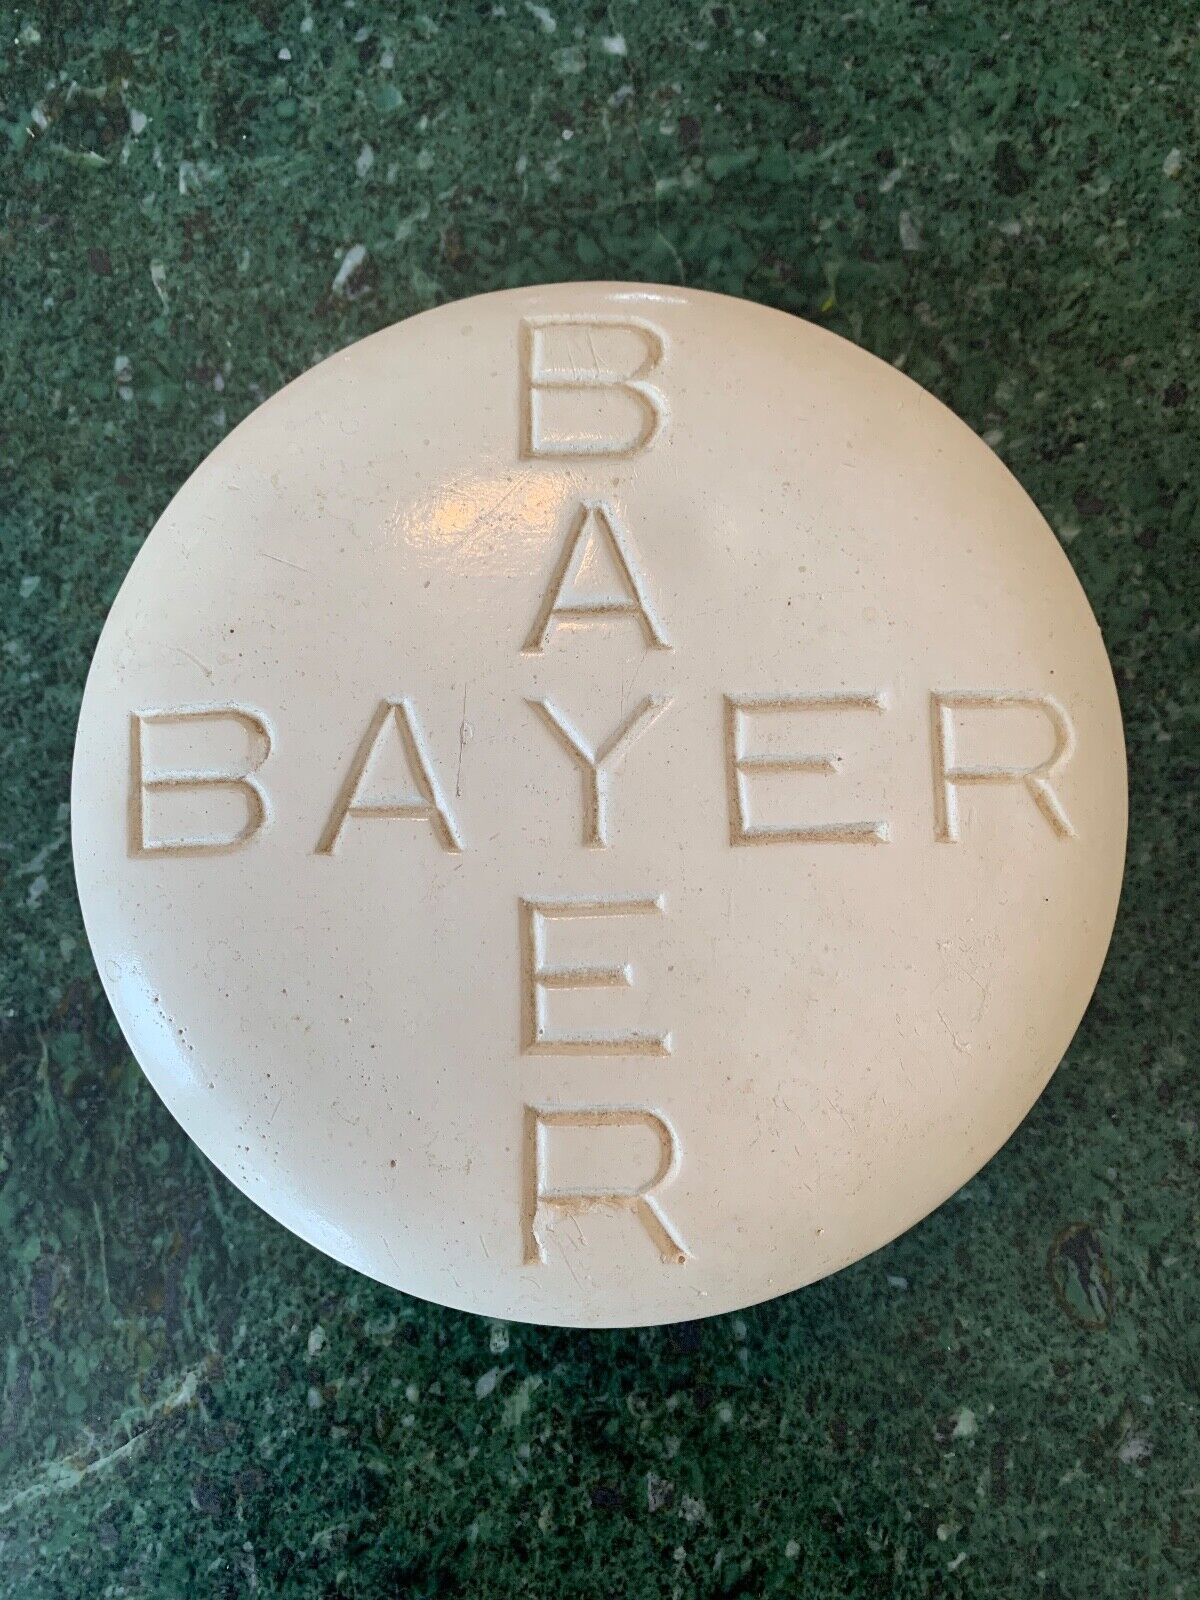 Vintage Giant-sized Bayer Aspirin Art Object/Paperweight 1980s